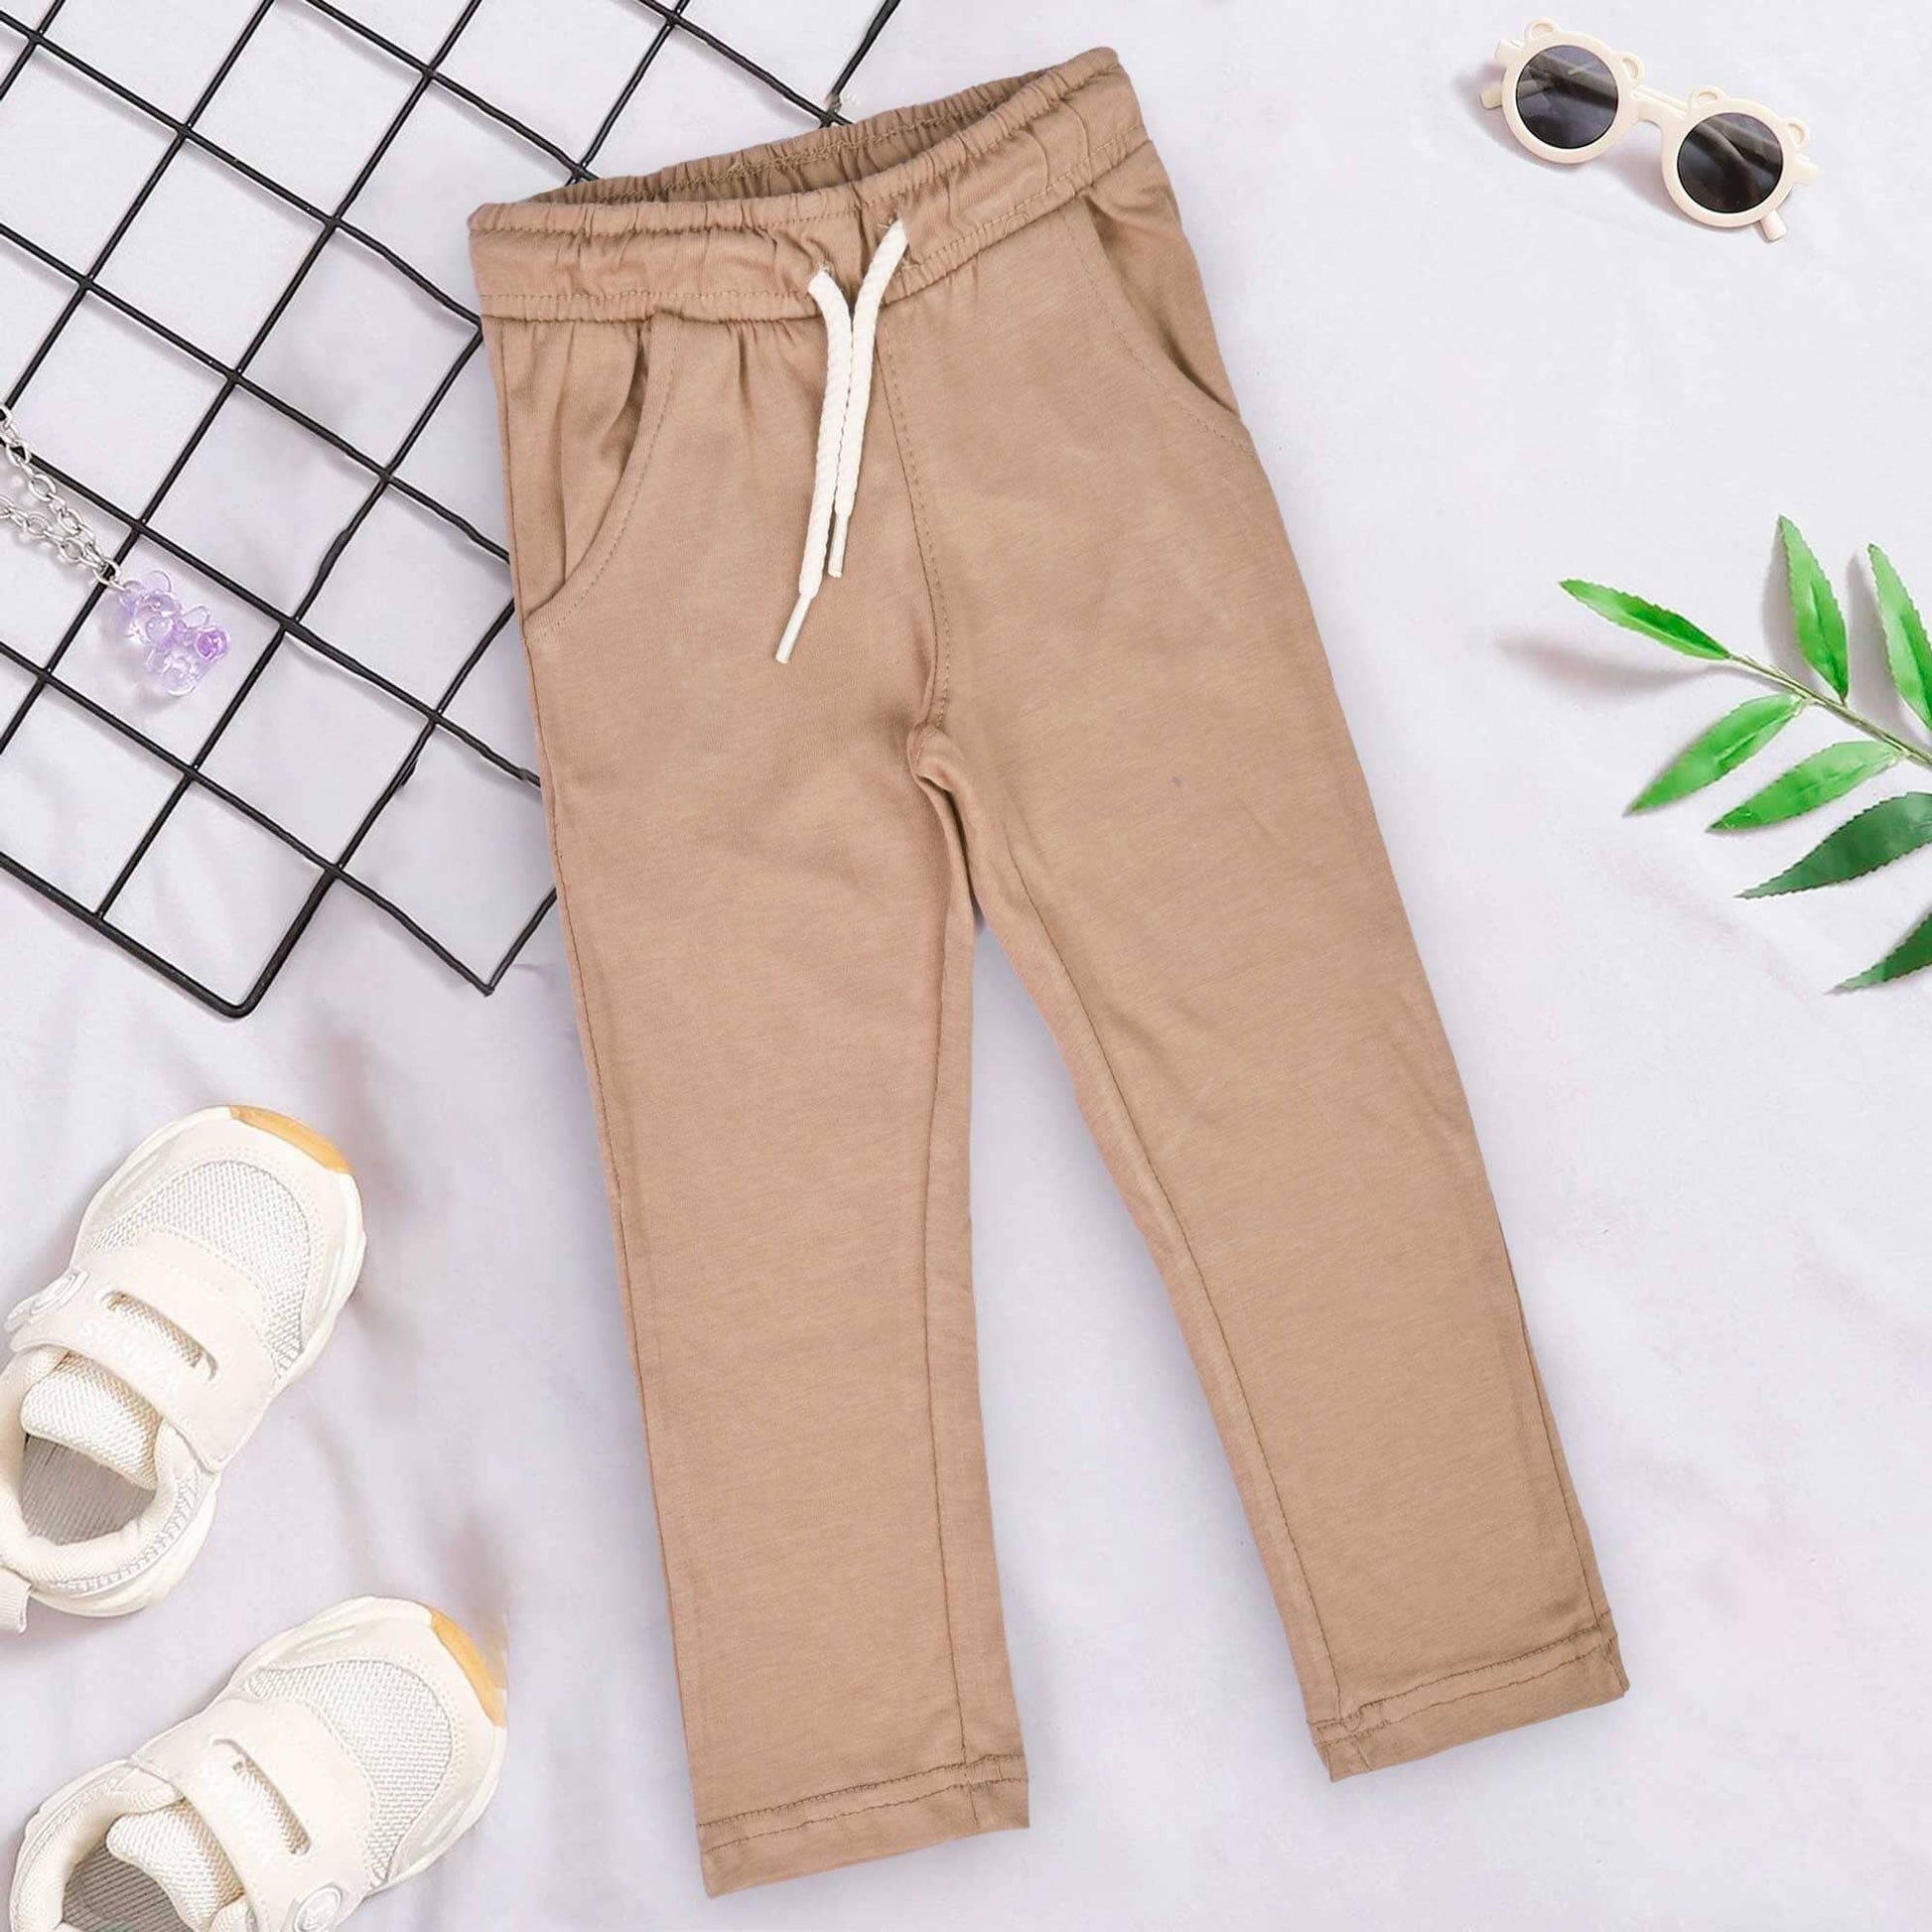 Minoti Kid's Solid Design Trousers Boy's Trousers SZK Mud 1-2 Years 